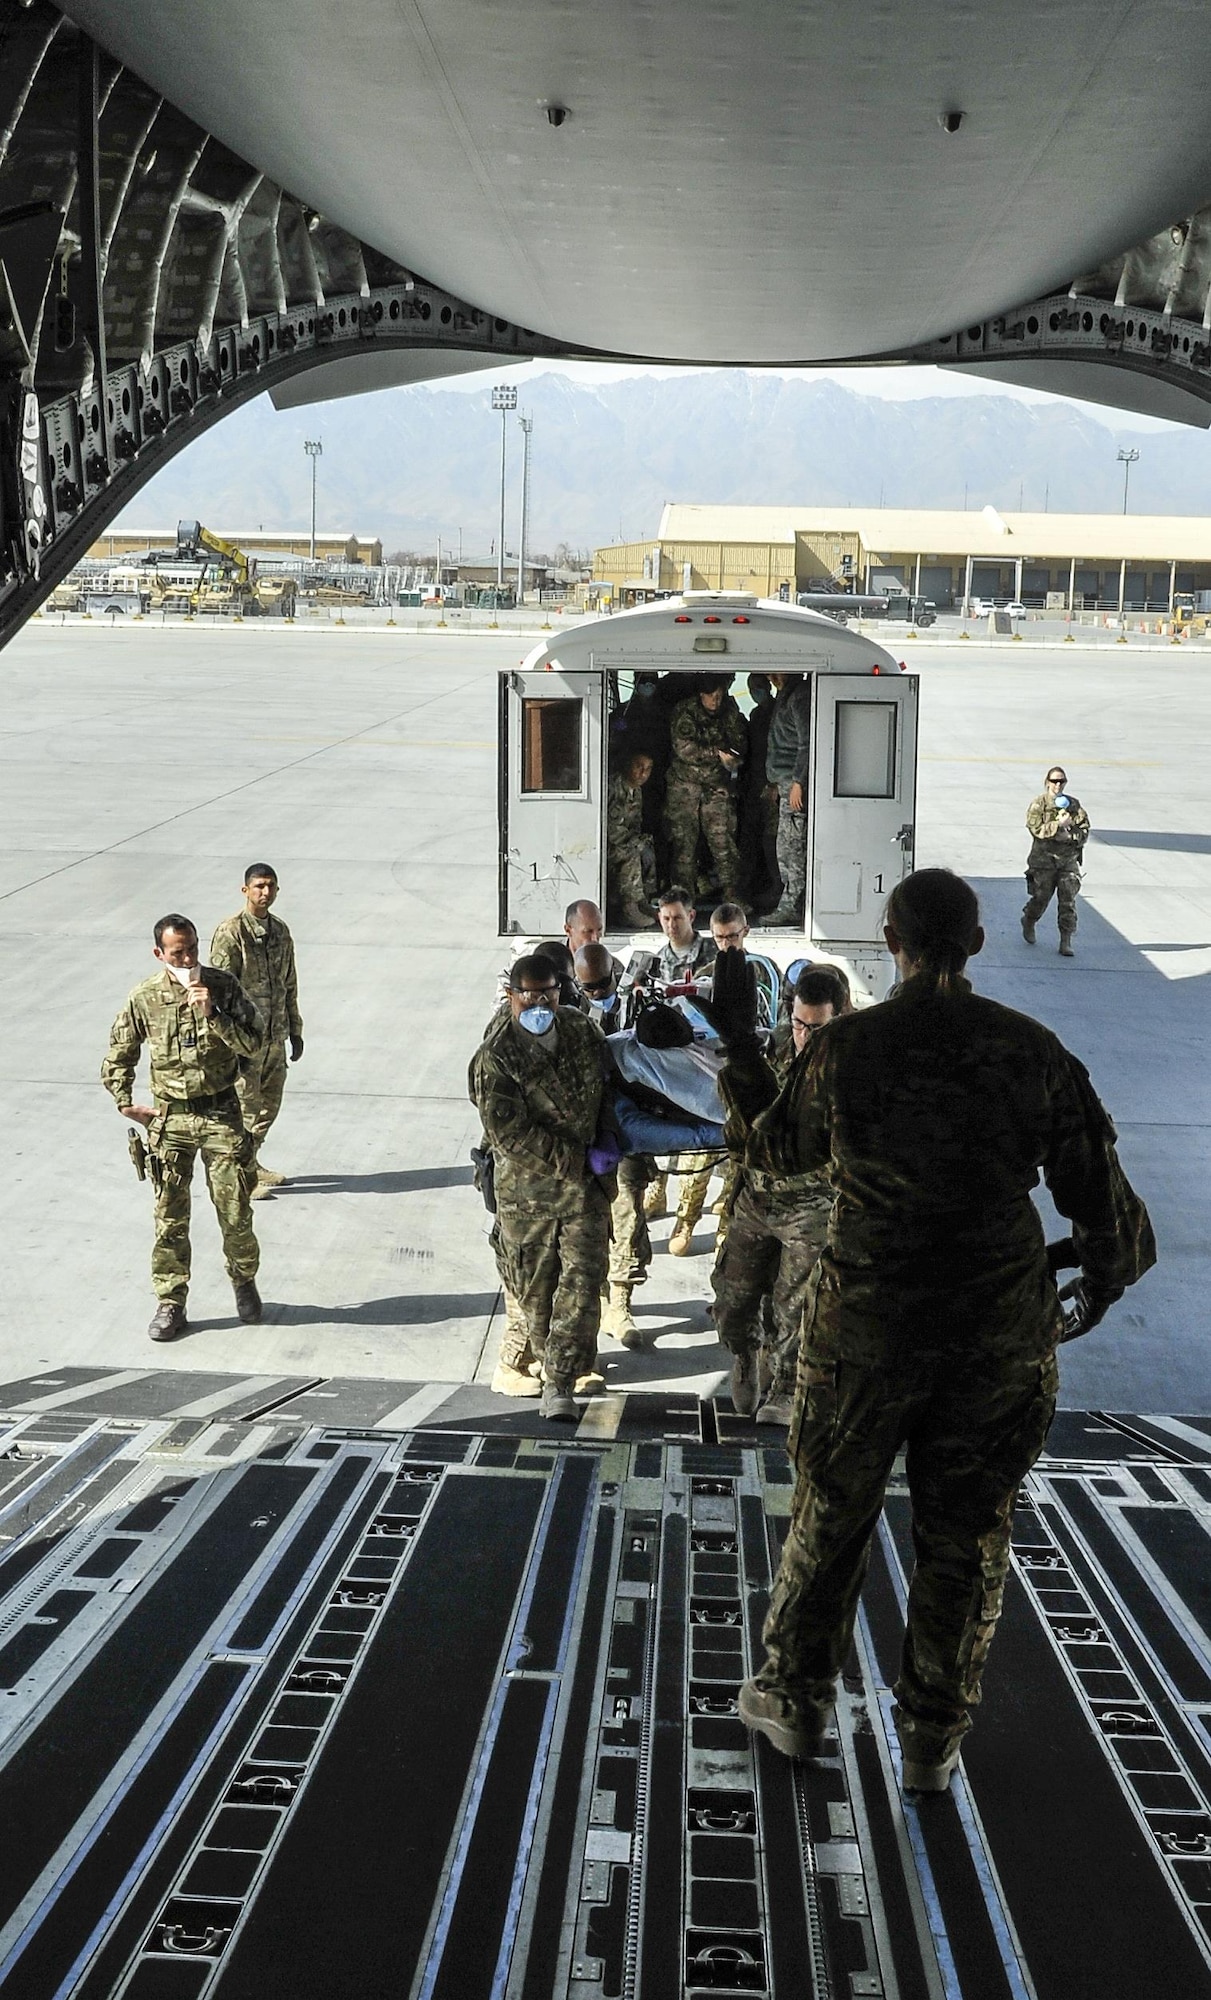 A 455th Expeditionary Medical Group team loads a NATO ally, who required Extracorporeal Membrane Oxygenation team support, onto an aeromedical evacuation transport at Bagram Air Field, Afghanistan, on Feb. 18, 2016. The ECMO team, dispatched from San Antonio Military Medical Center, uses technology that bypasses the lungs and infuses the blood directly with oxygen, while removing the harmful carbon dioxide from the blood stream. The patient was airlifted to Landstuhl Regional Medical Center, Germany, where he will receive 7 to 14 days of additional ECMO treatment. (U.S. Air Force photo by Tech. Sgt. Nicholas Rau)